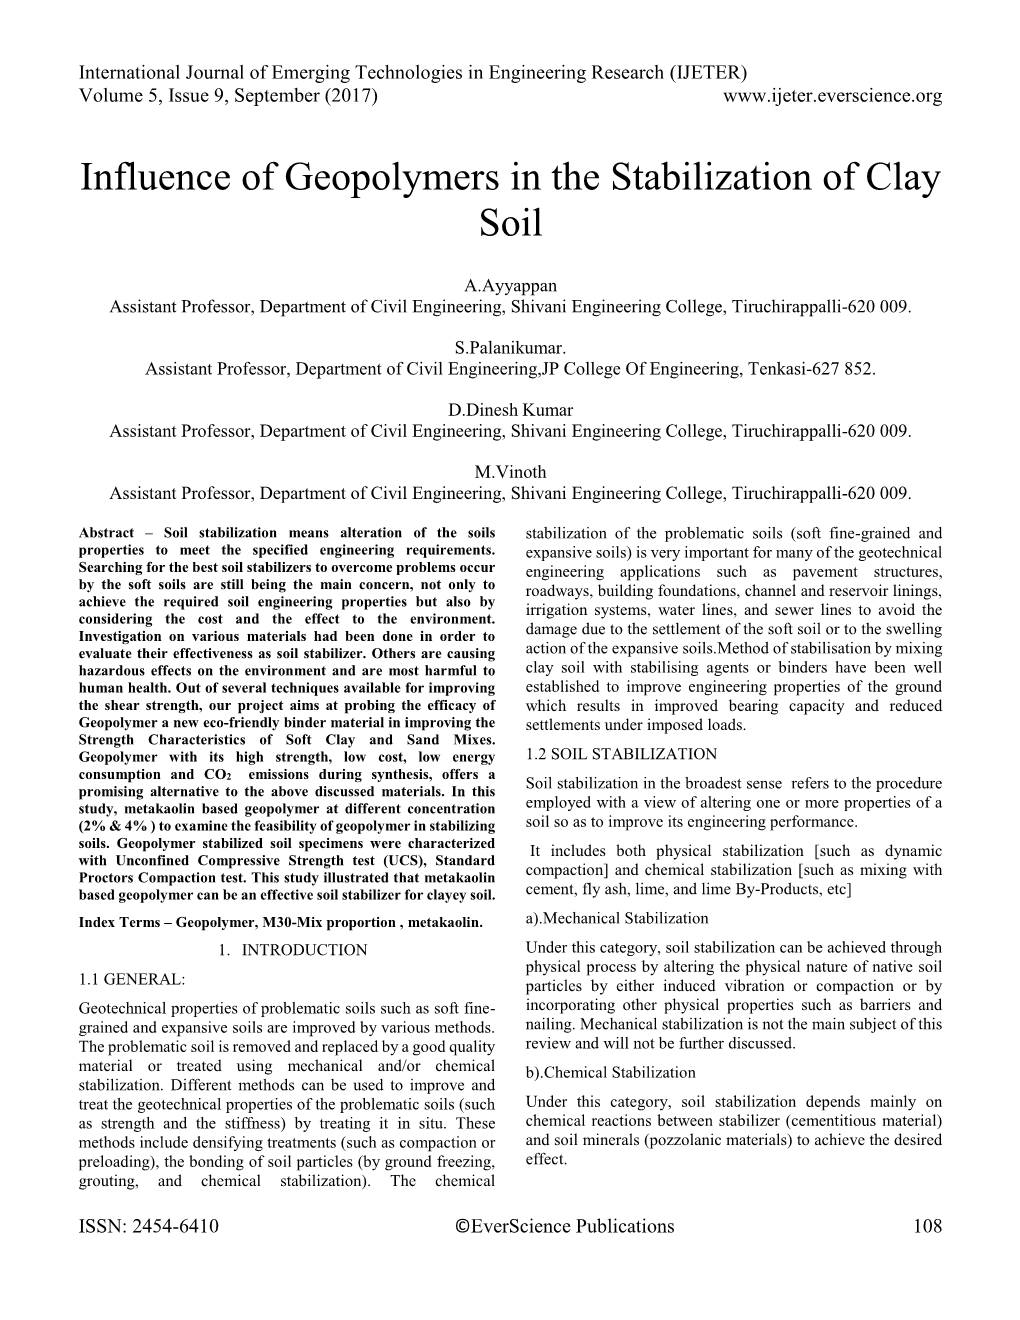 Influence of Geopolymers in the Stabilization of Clay Soil